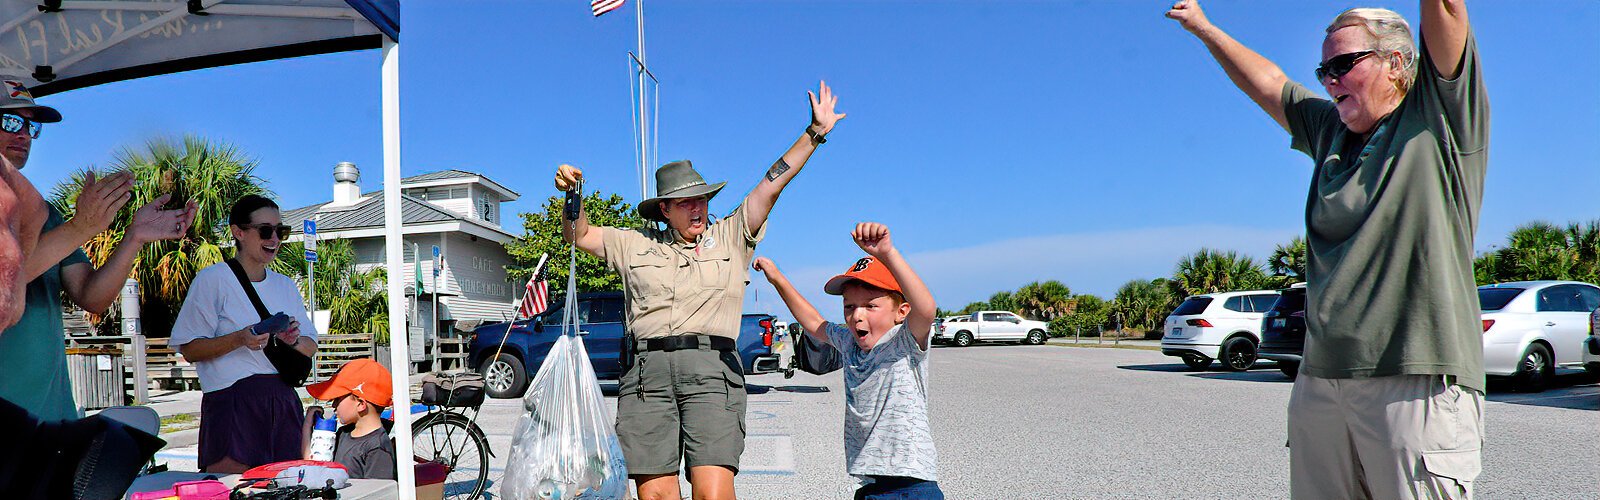 Applauded by his parents, six-year-old Charlie jumps in excitement as Honeymoon Island park ranger Beth Reynolds announces the weight of the trash collected by him and his family.